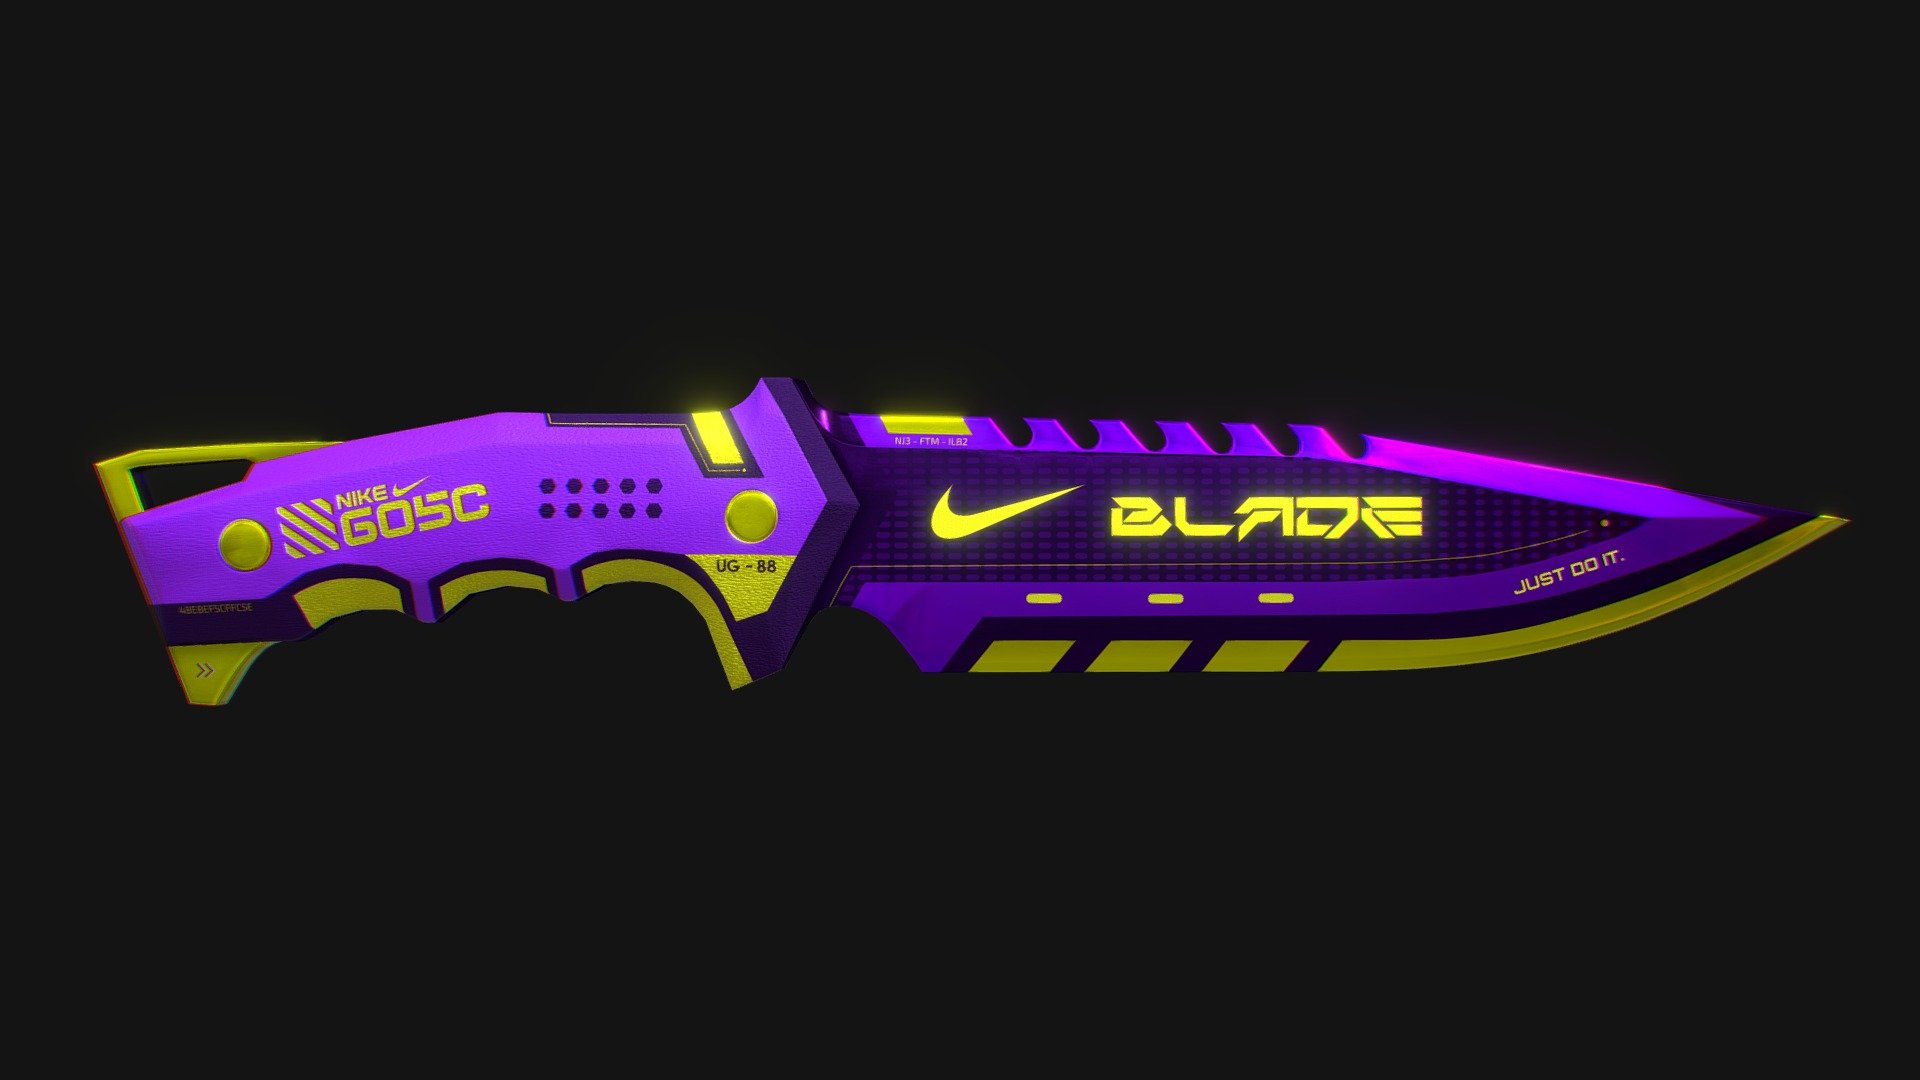 NIKE BLADE

Discover the BLADE skin for the MELEE model on Valorant game. 

Find the other Nike Esport Shop skins on my profile.

Disclaimer : Nike Esport Shop is a fictional project that consists of imagining the future skins made by the equipment manufacturer NIKE in various major esports games.

Socials networks : 





Twitter : https://twitter.com/peiksprod




Instagram : https://www.instagram.com/peiksprod




Youtube : https://www.youtube.com/c/PeiksProd




Behance : https://www.behance.net/peiksprod


 - NIKE BLADE - Melee (Valorant) - 3D model by PEIKS 3d model